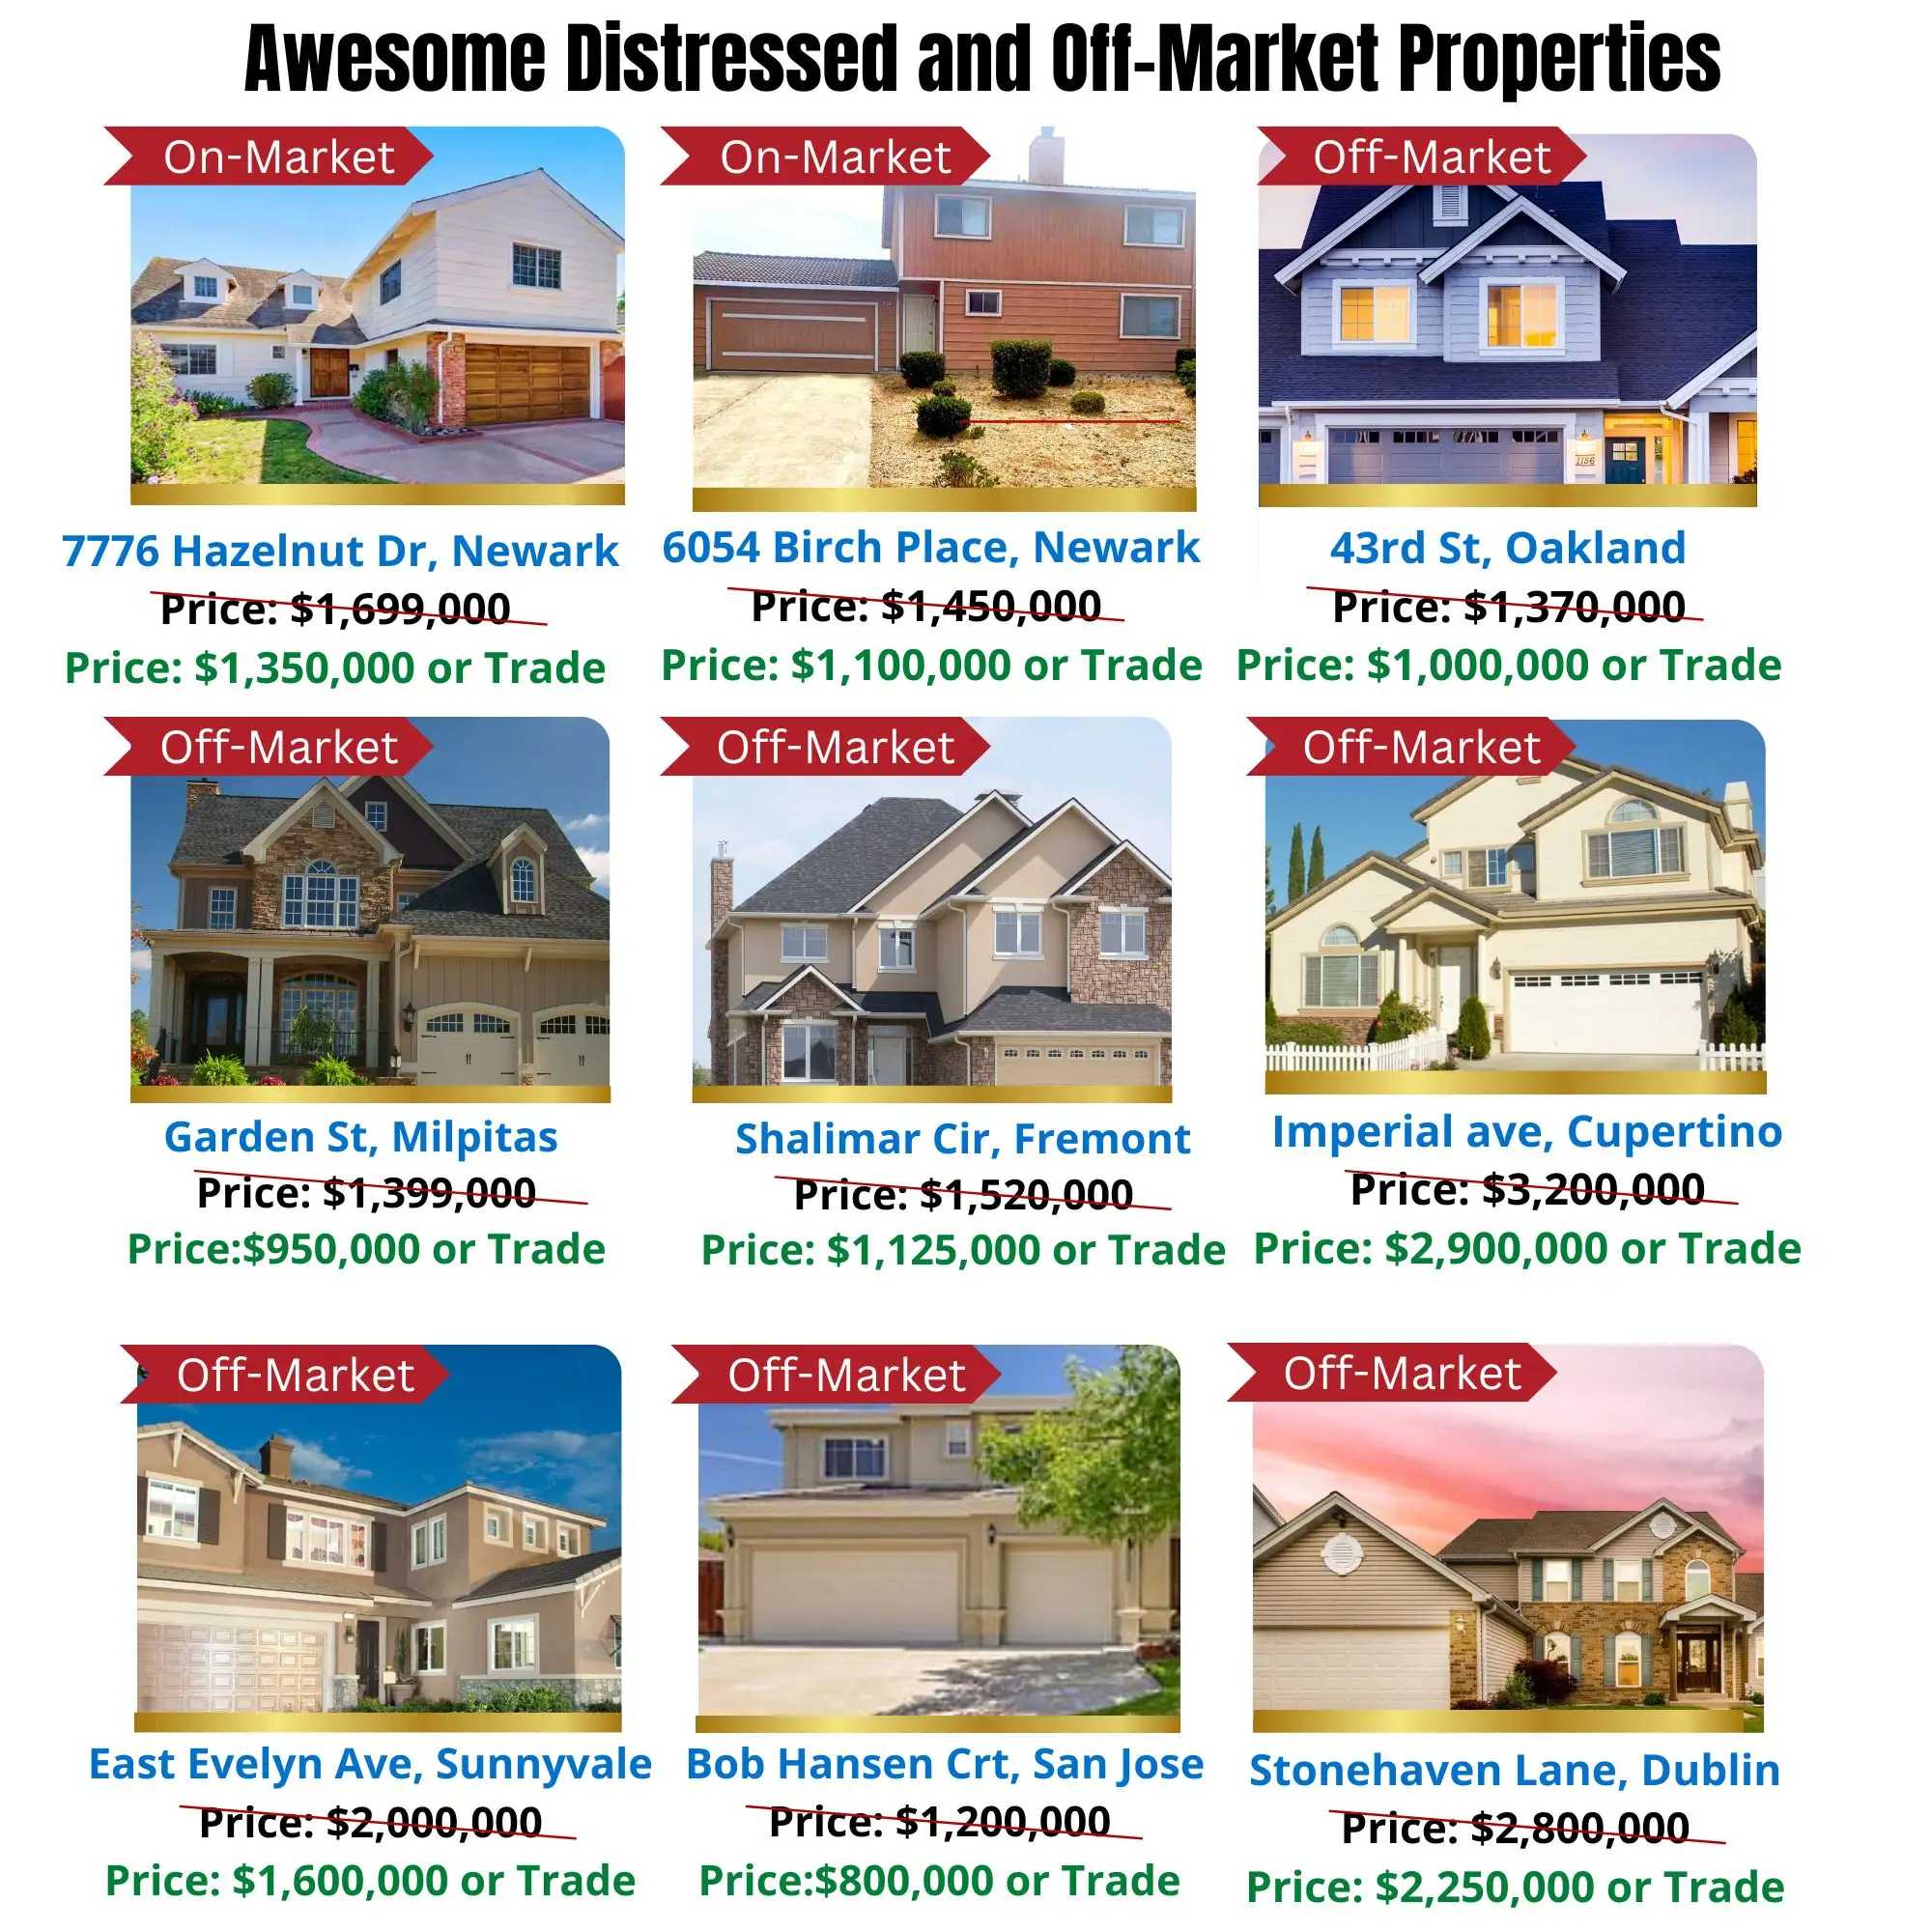 Awesome Distressed and Off-Market Properties